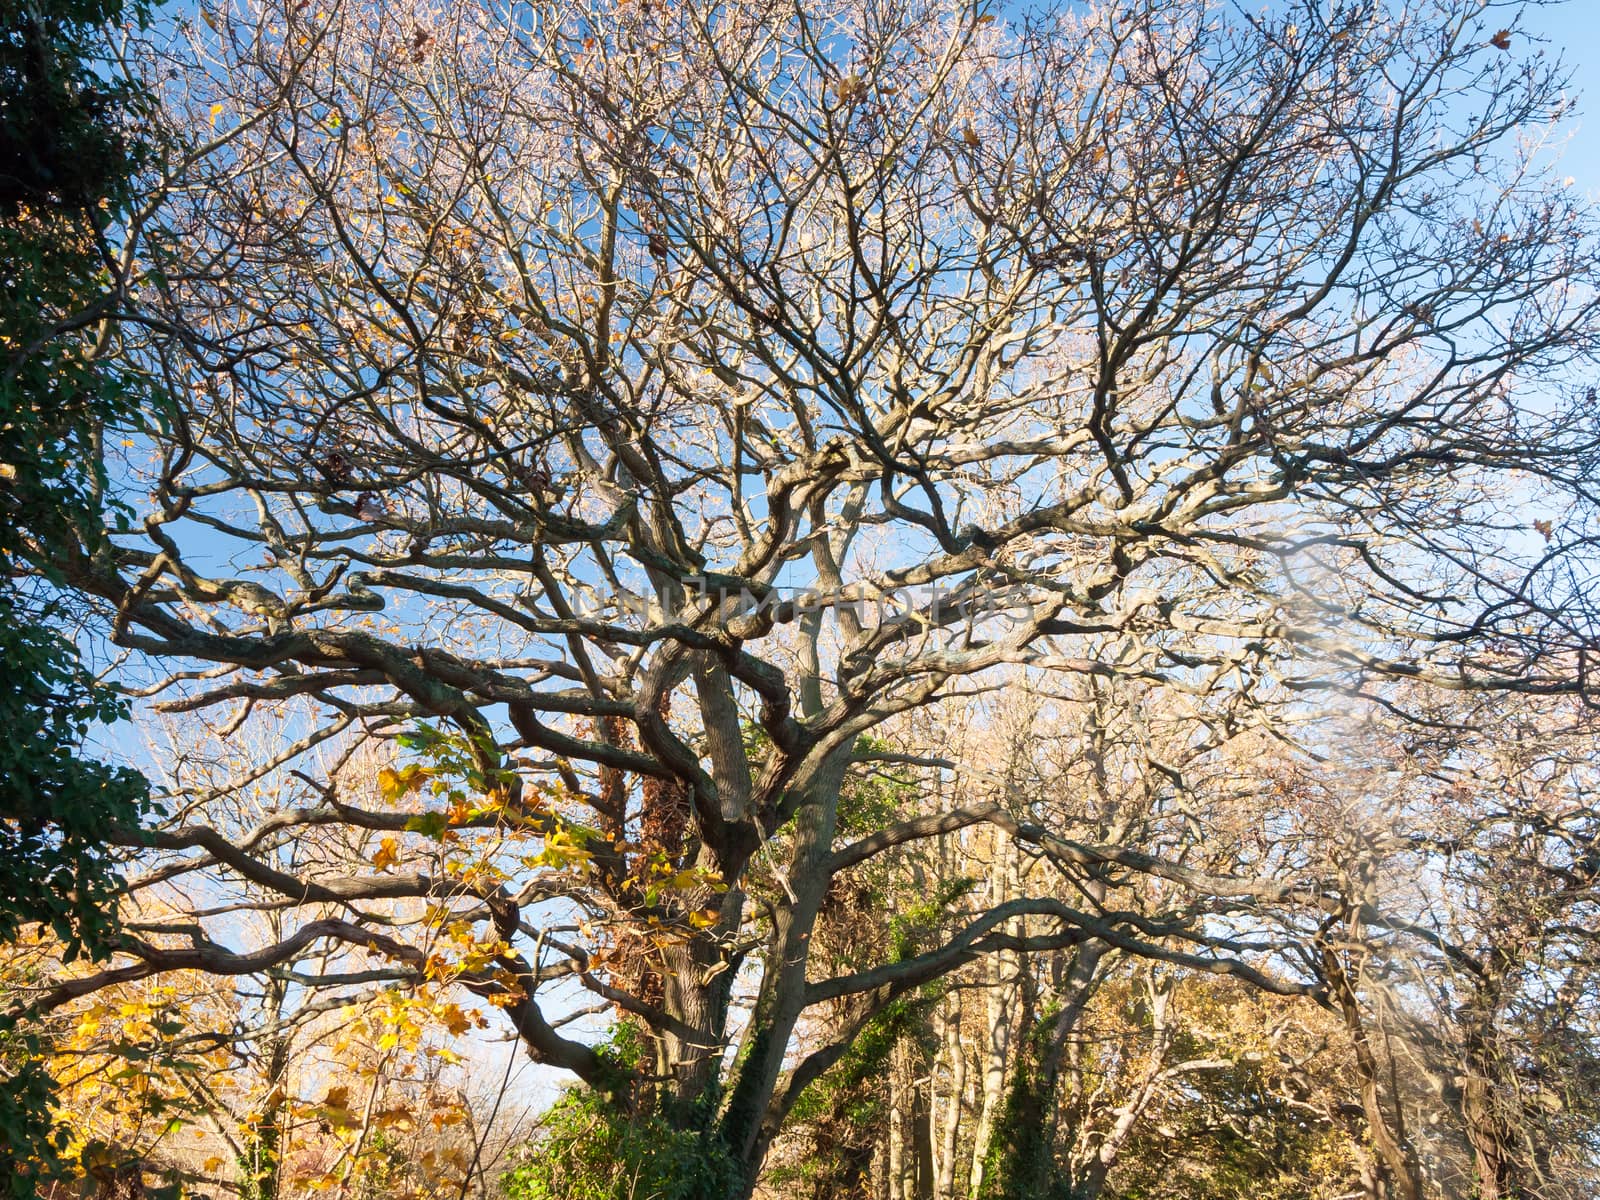 bare branches oak autumn no people many branches brown no leaves by callumrc